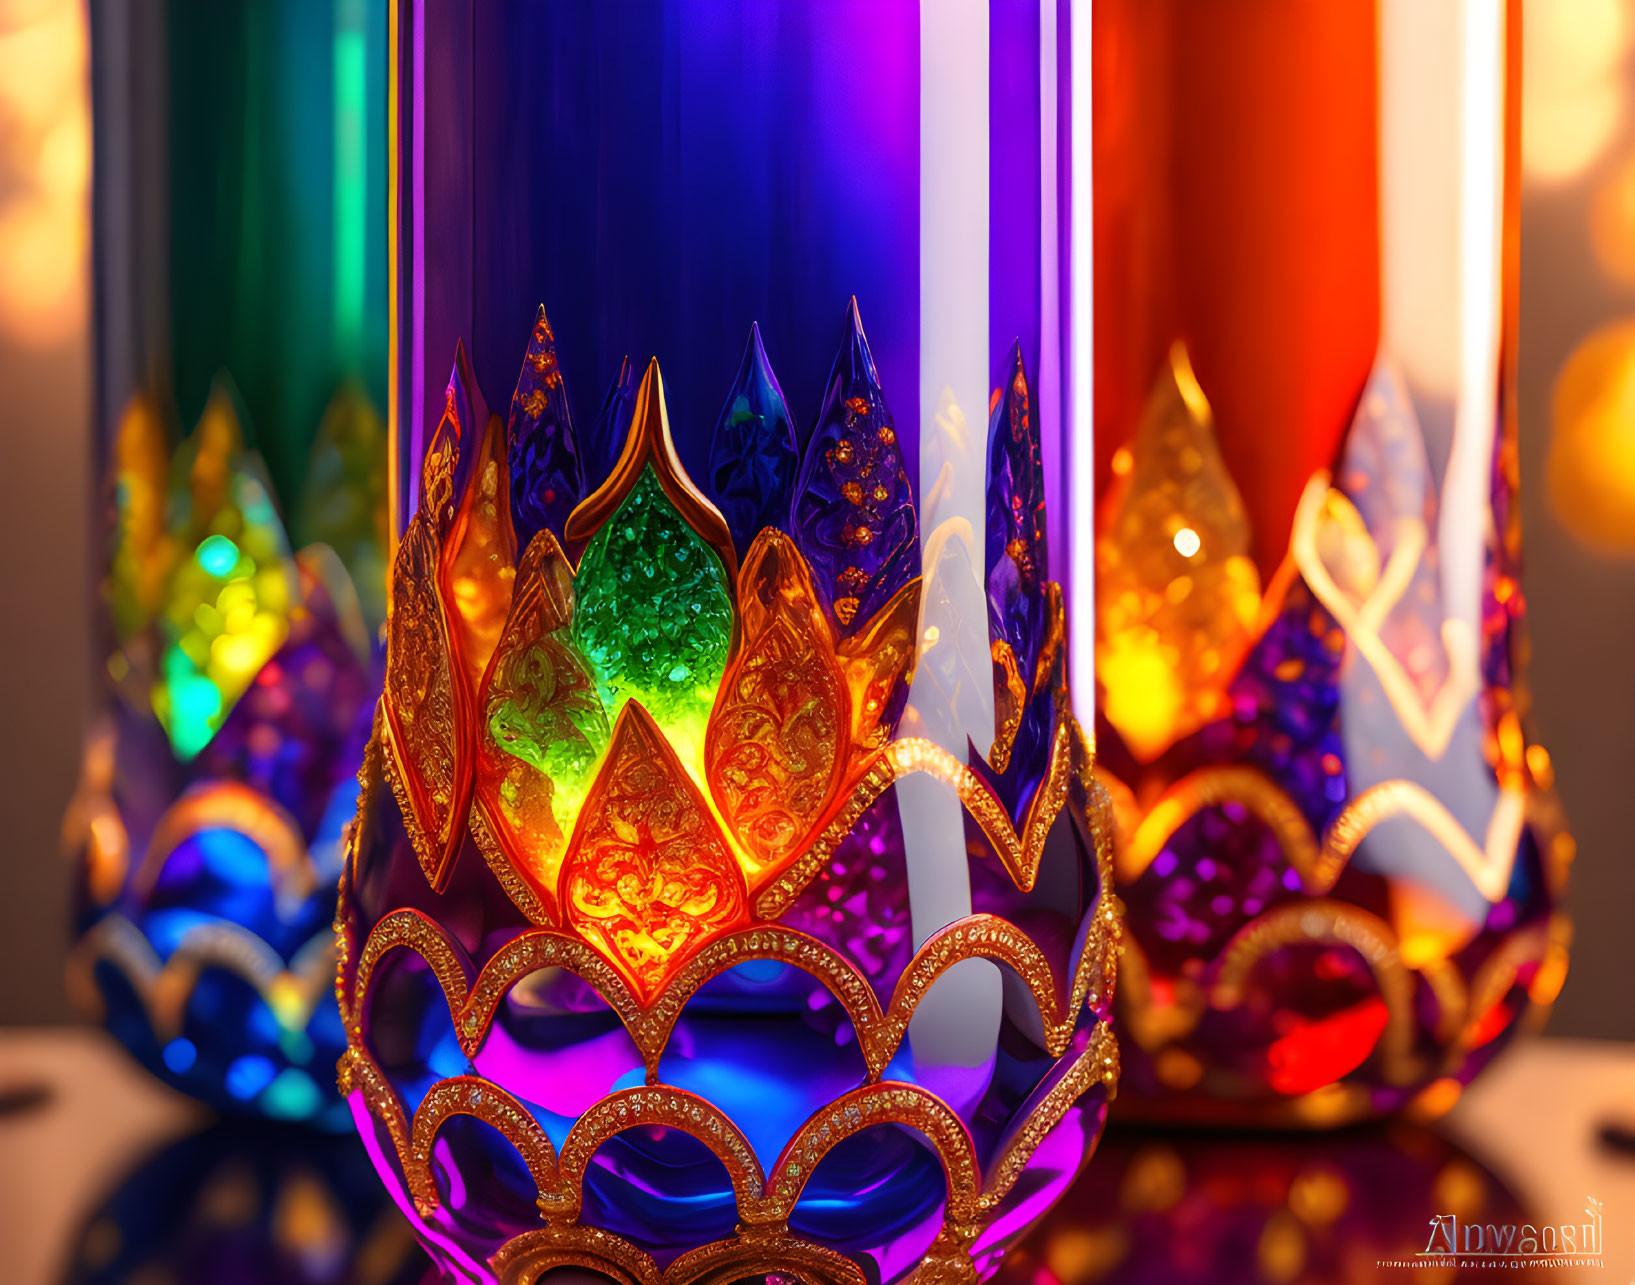 Vibrant Stained Glass Lanterns with Golden Patterns and Warm Illumination